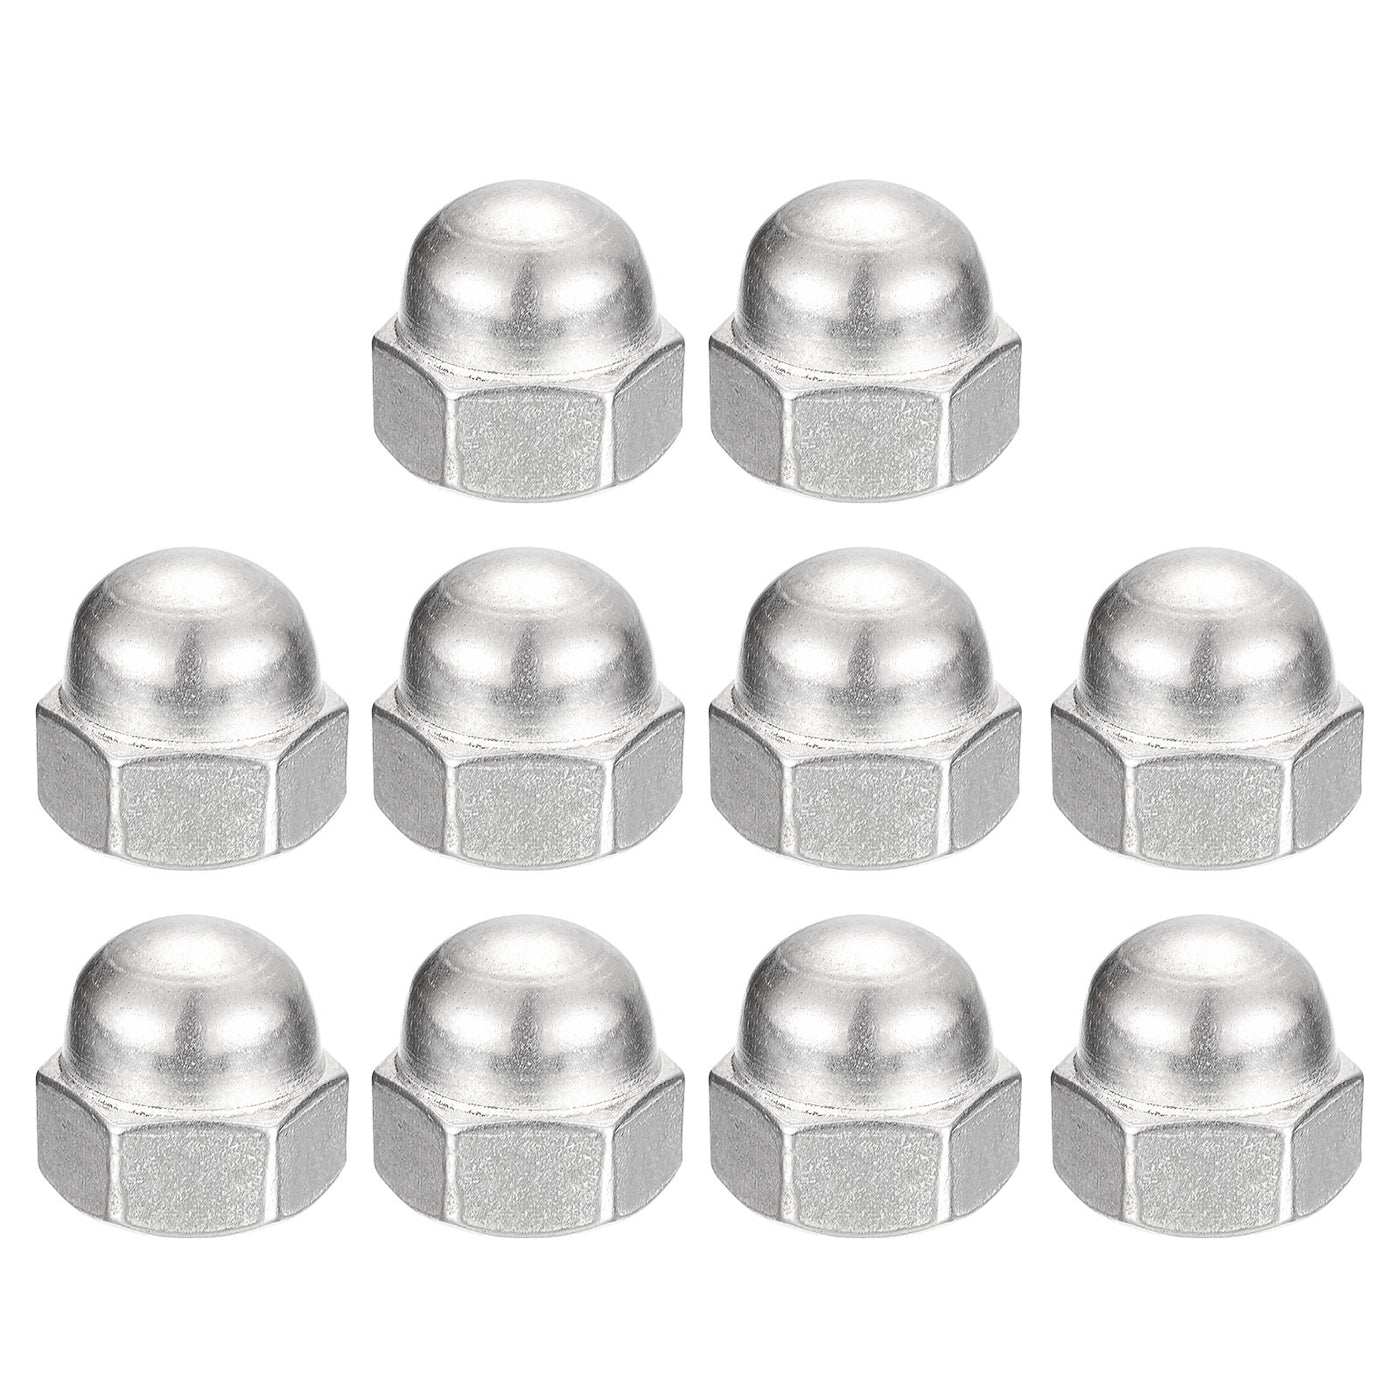 uxcell Uxcell 5/8-11 Acorn Cap Nuts,10pcs - 304 Stainless Steel Hardware Nuts, Acorn Hex Cap Dome Head Nuts for Fasteners (Silver)